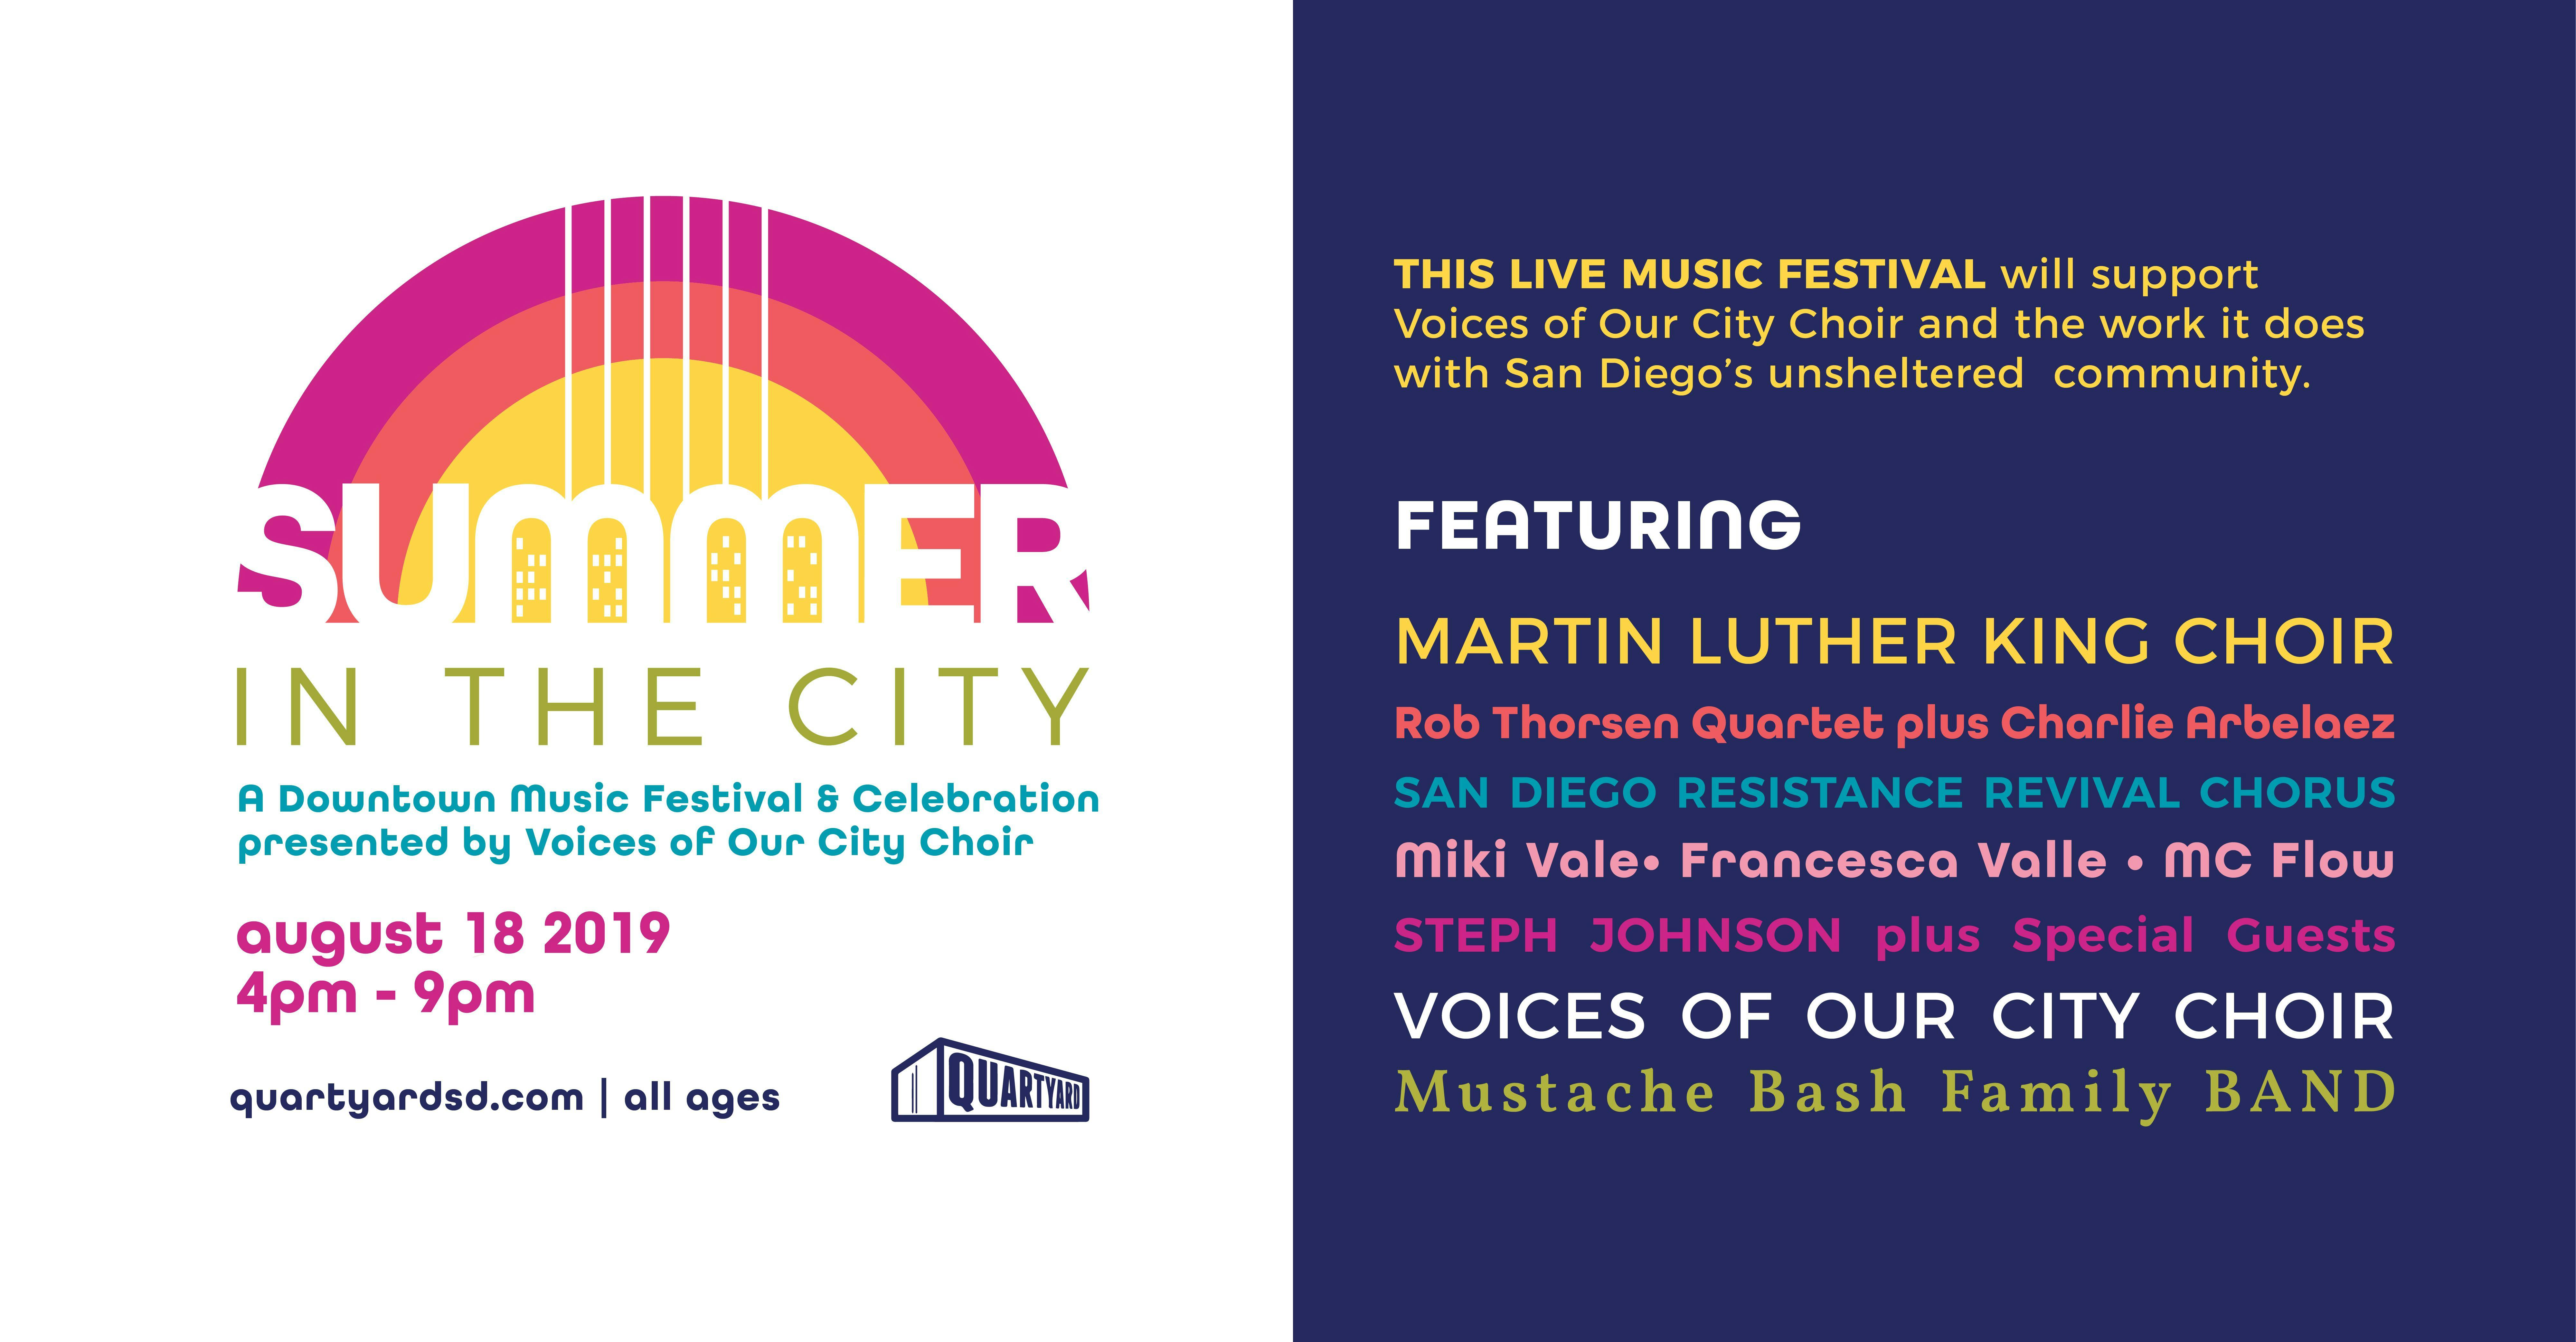 Summer in the City - A Downtown Music Festival & Celebration